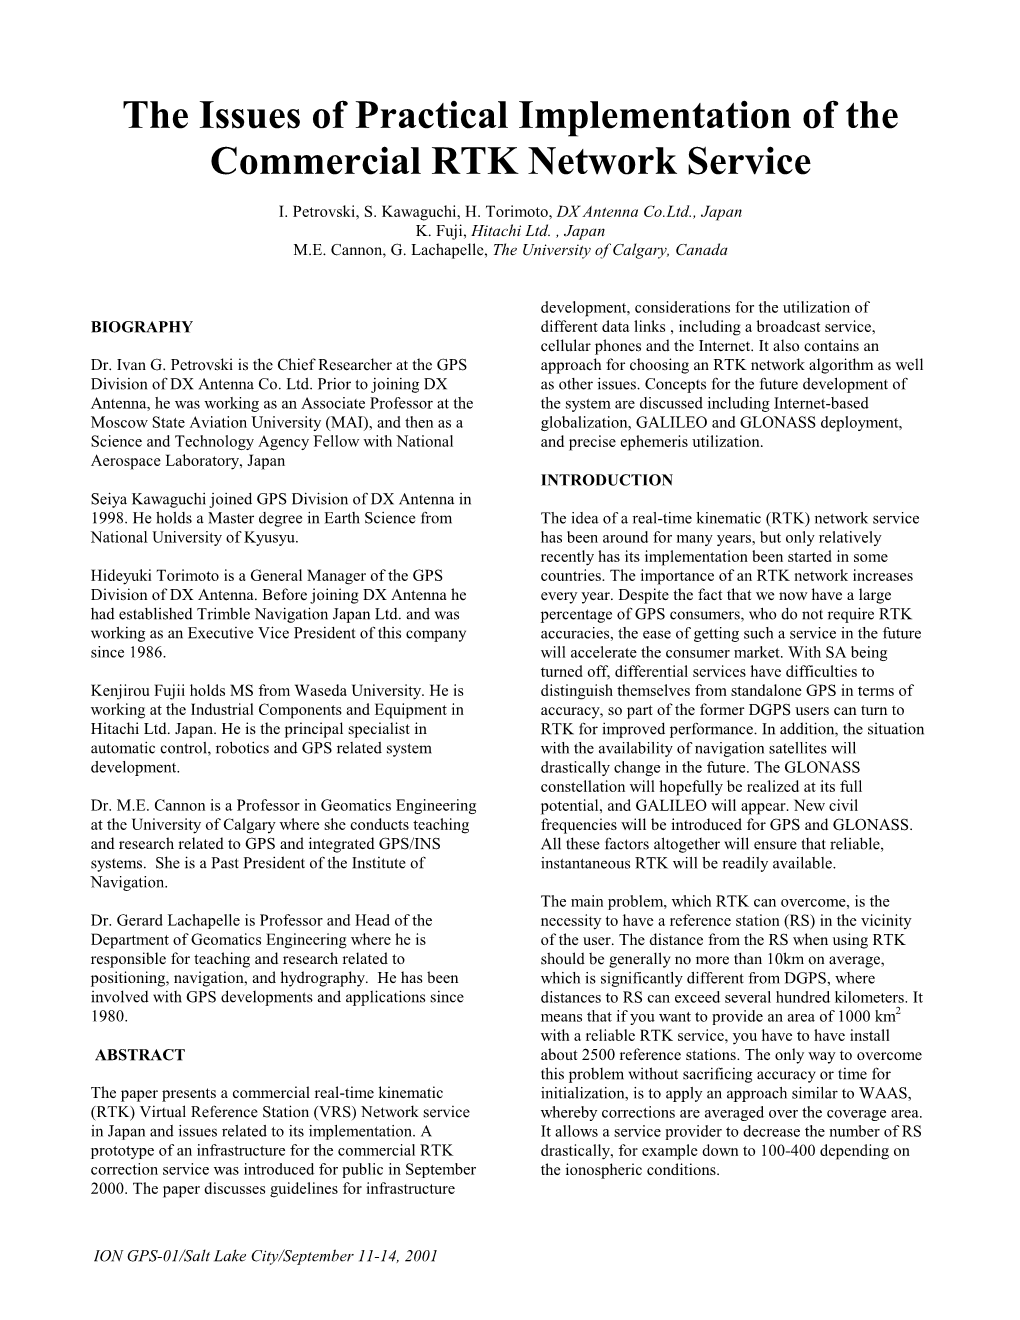 The Issues of Practical Implementation of the Commercial RTK Network Service